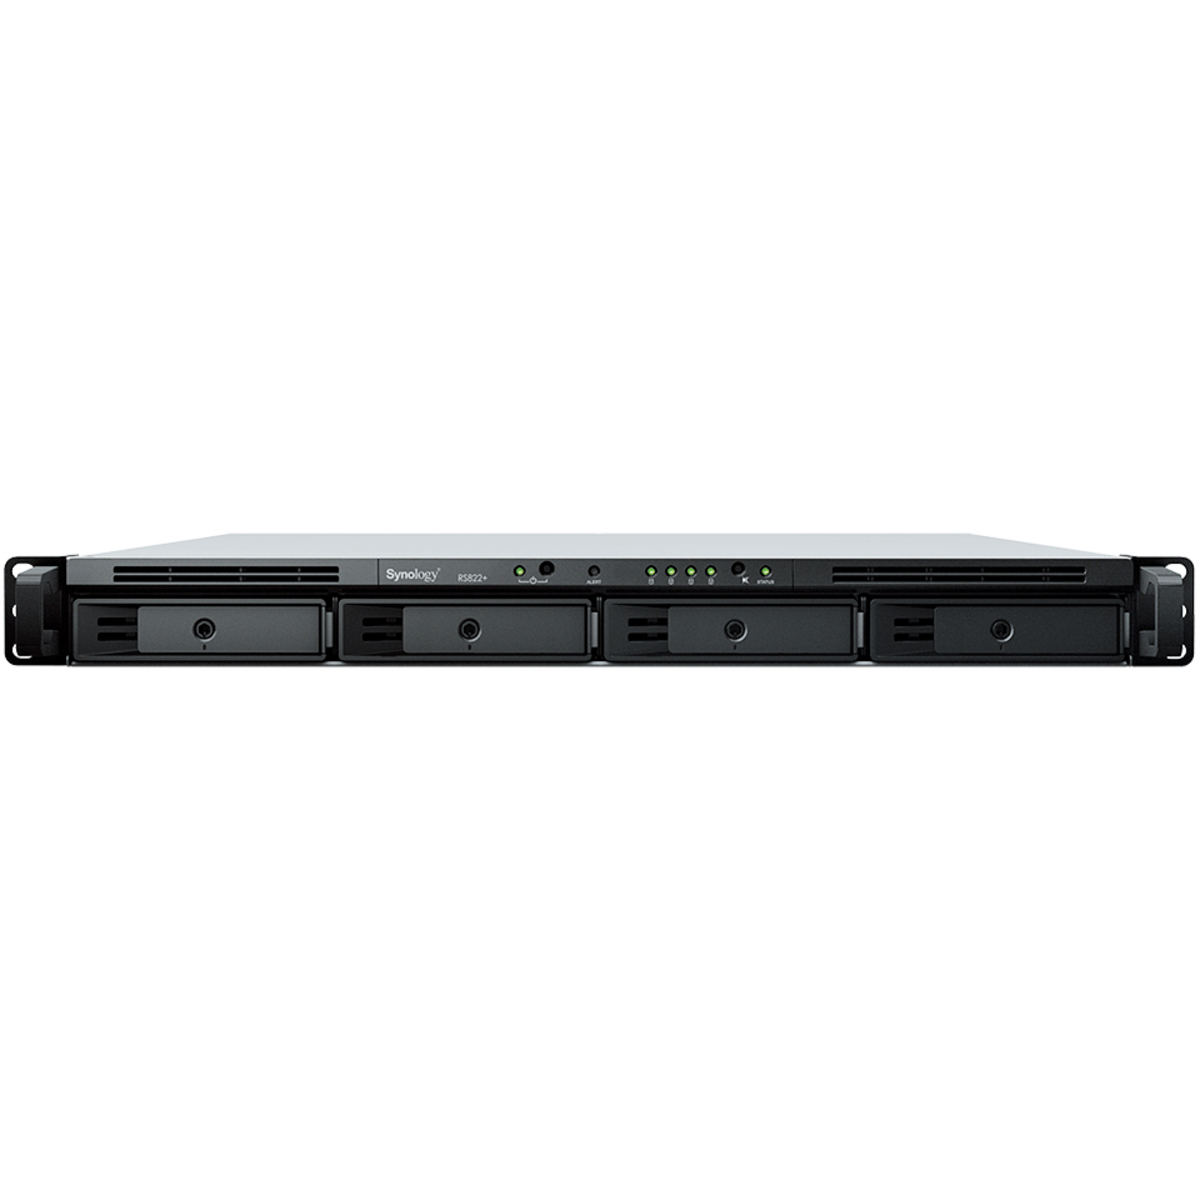 buy $2275 Synology RackStation RS822+ 64tb RackMount NAS - Network Attached Storage Device 4x16000gb Toshiba Enterprise Capacity MG08ACA16TE 3.5 7200rpm SATA 6Gb/s HDD ENTERPRISE Class Drives Installed - Burn-In Tested - nas headquarters buy network attached storage server device das new raid-5 free shipping usa RackStation RS822+